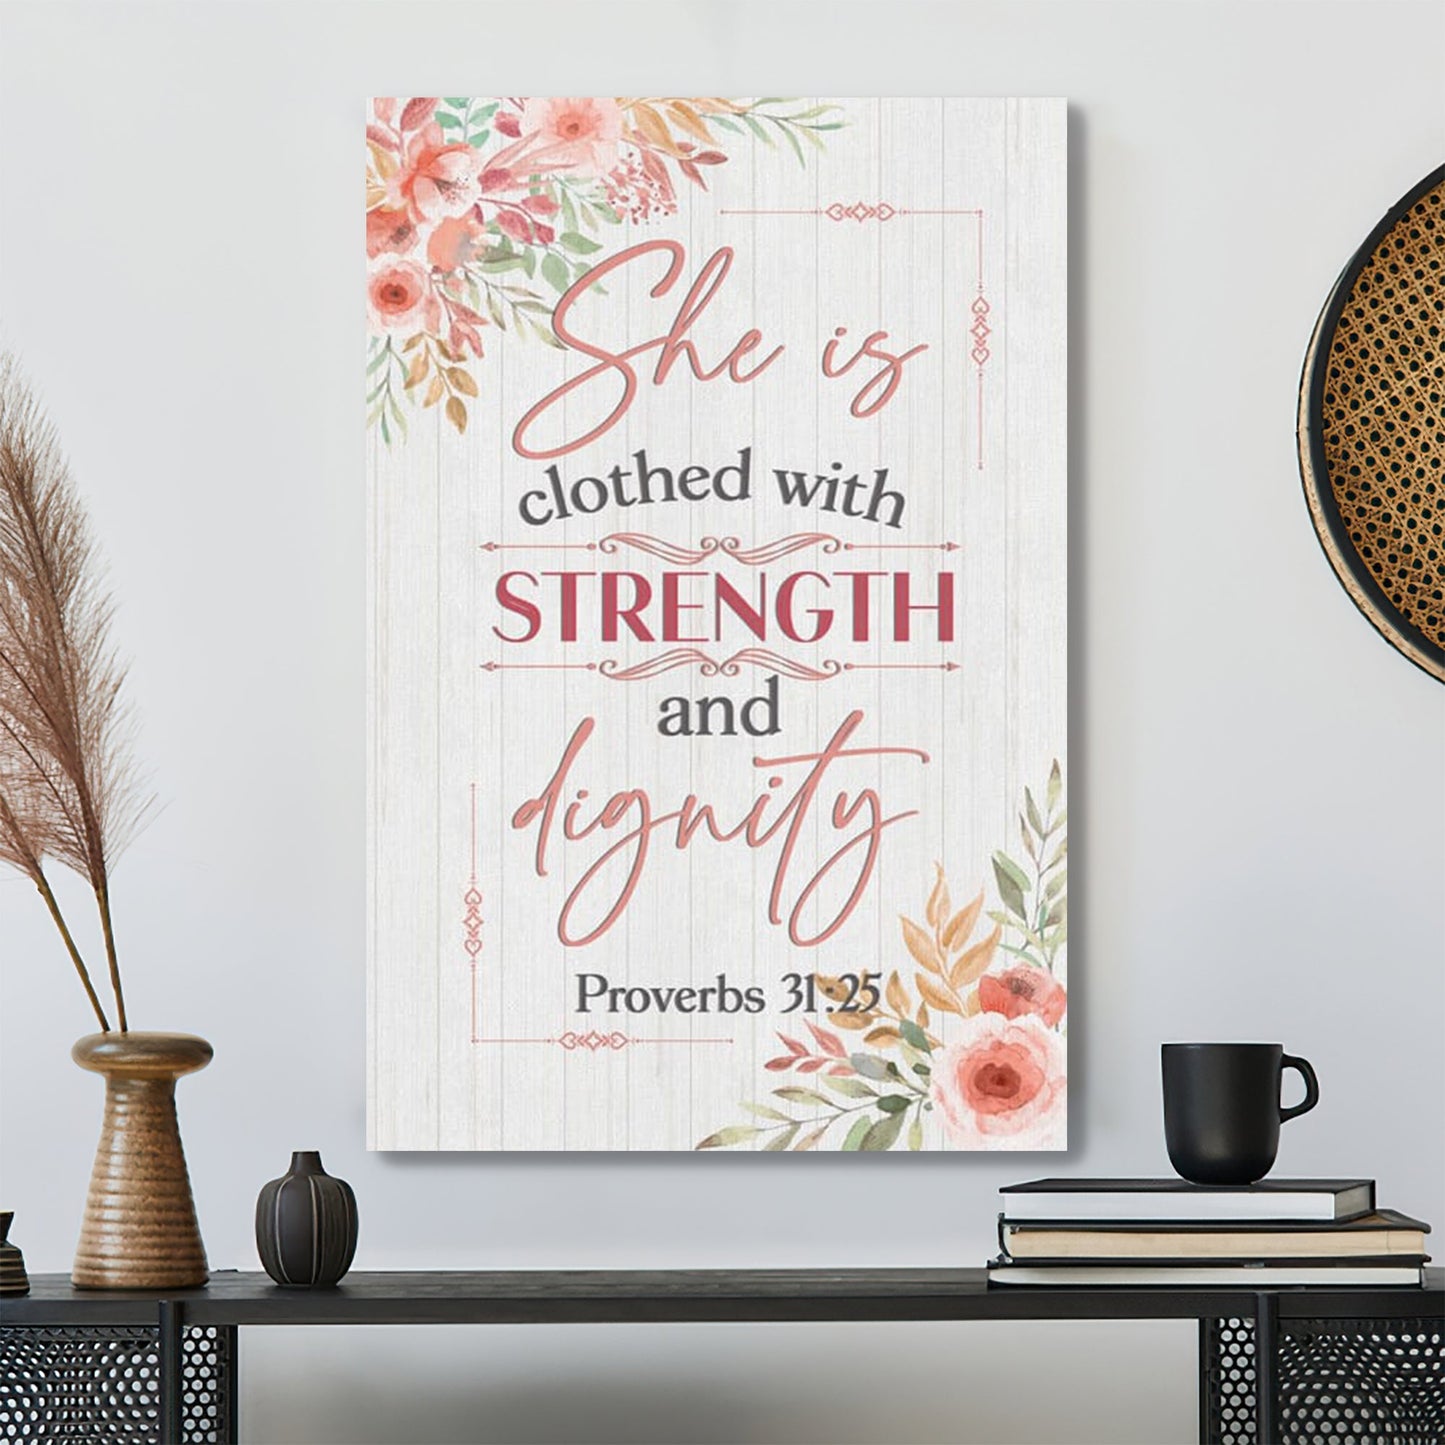 Bible Verse Canvas - Proverbs 3125 She Is Clothed With Strength And Dignity - Scripture Canvas Wall Art - Ciaocustom